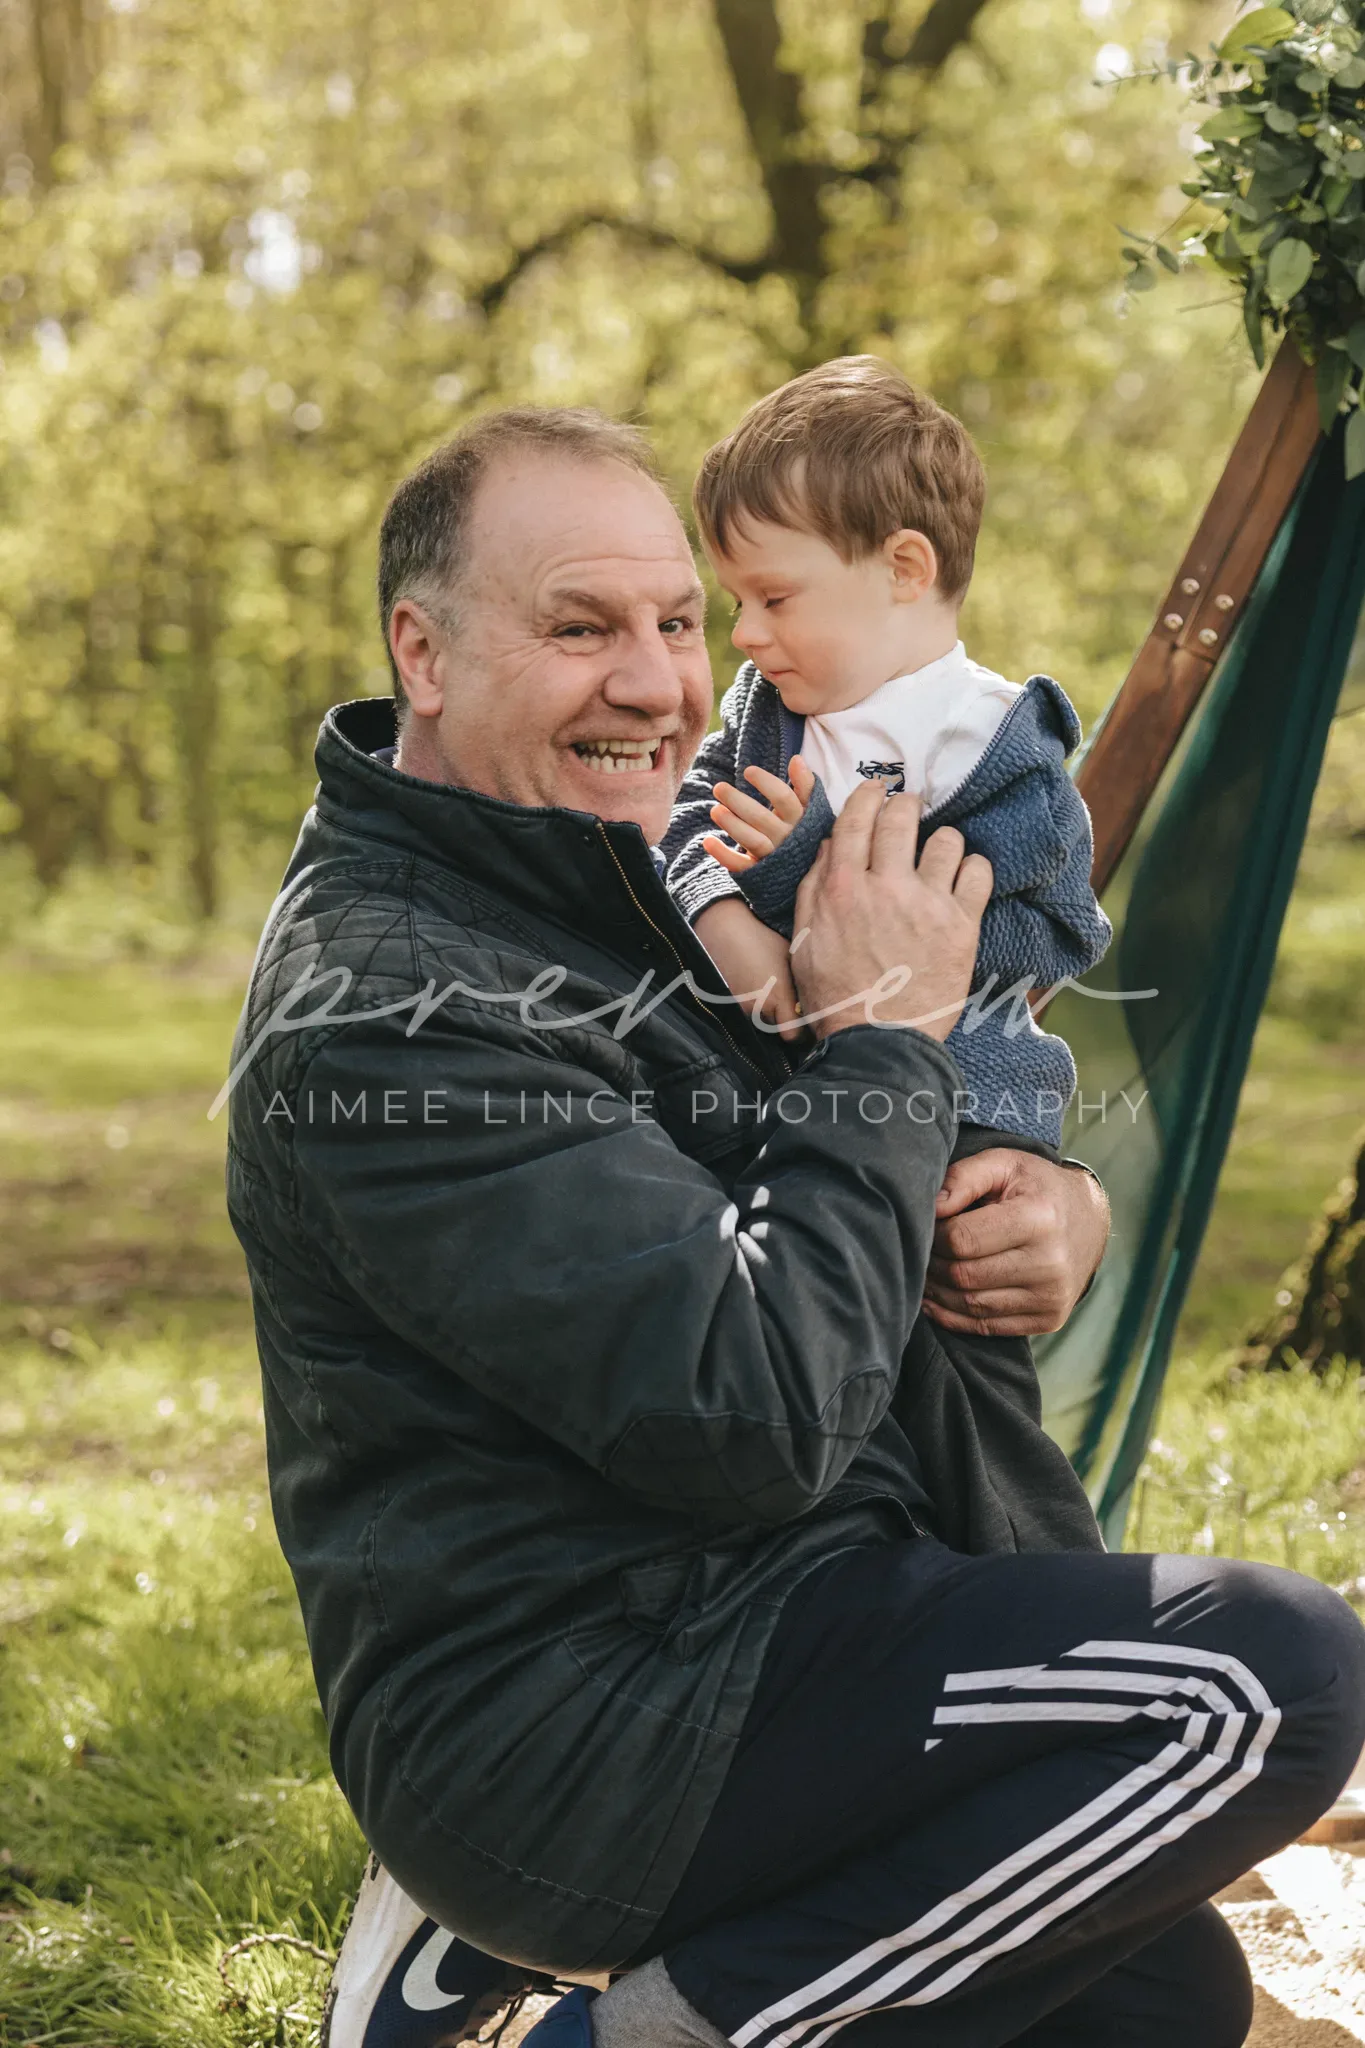 A joyful moment between a middle-aged man and a young child as they interact closely at a park. the man is crouching, holding the child in his arms, both are smiling, surrounded by lush green trees.